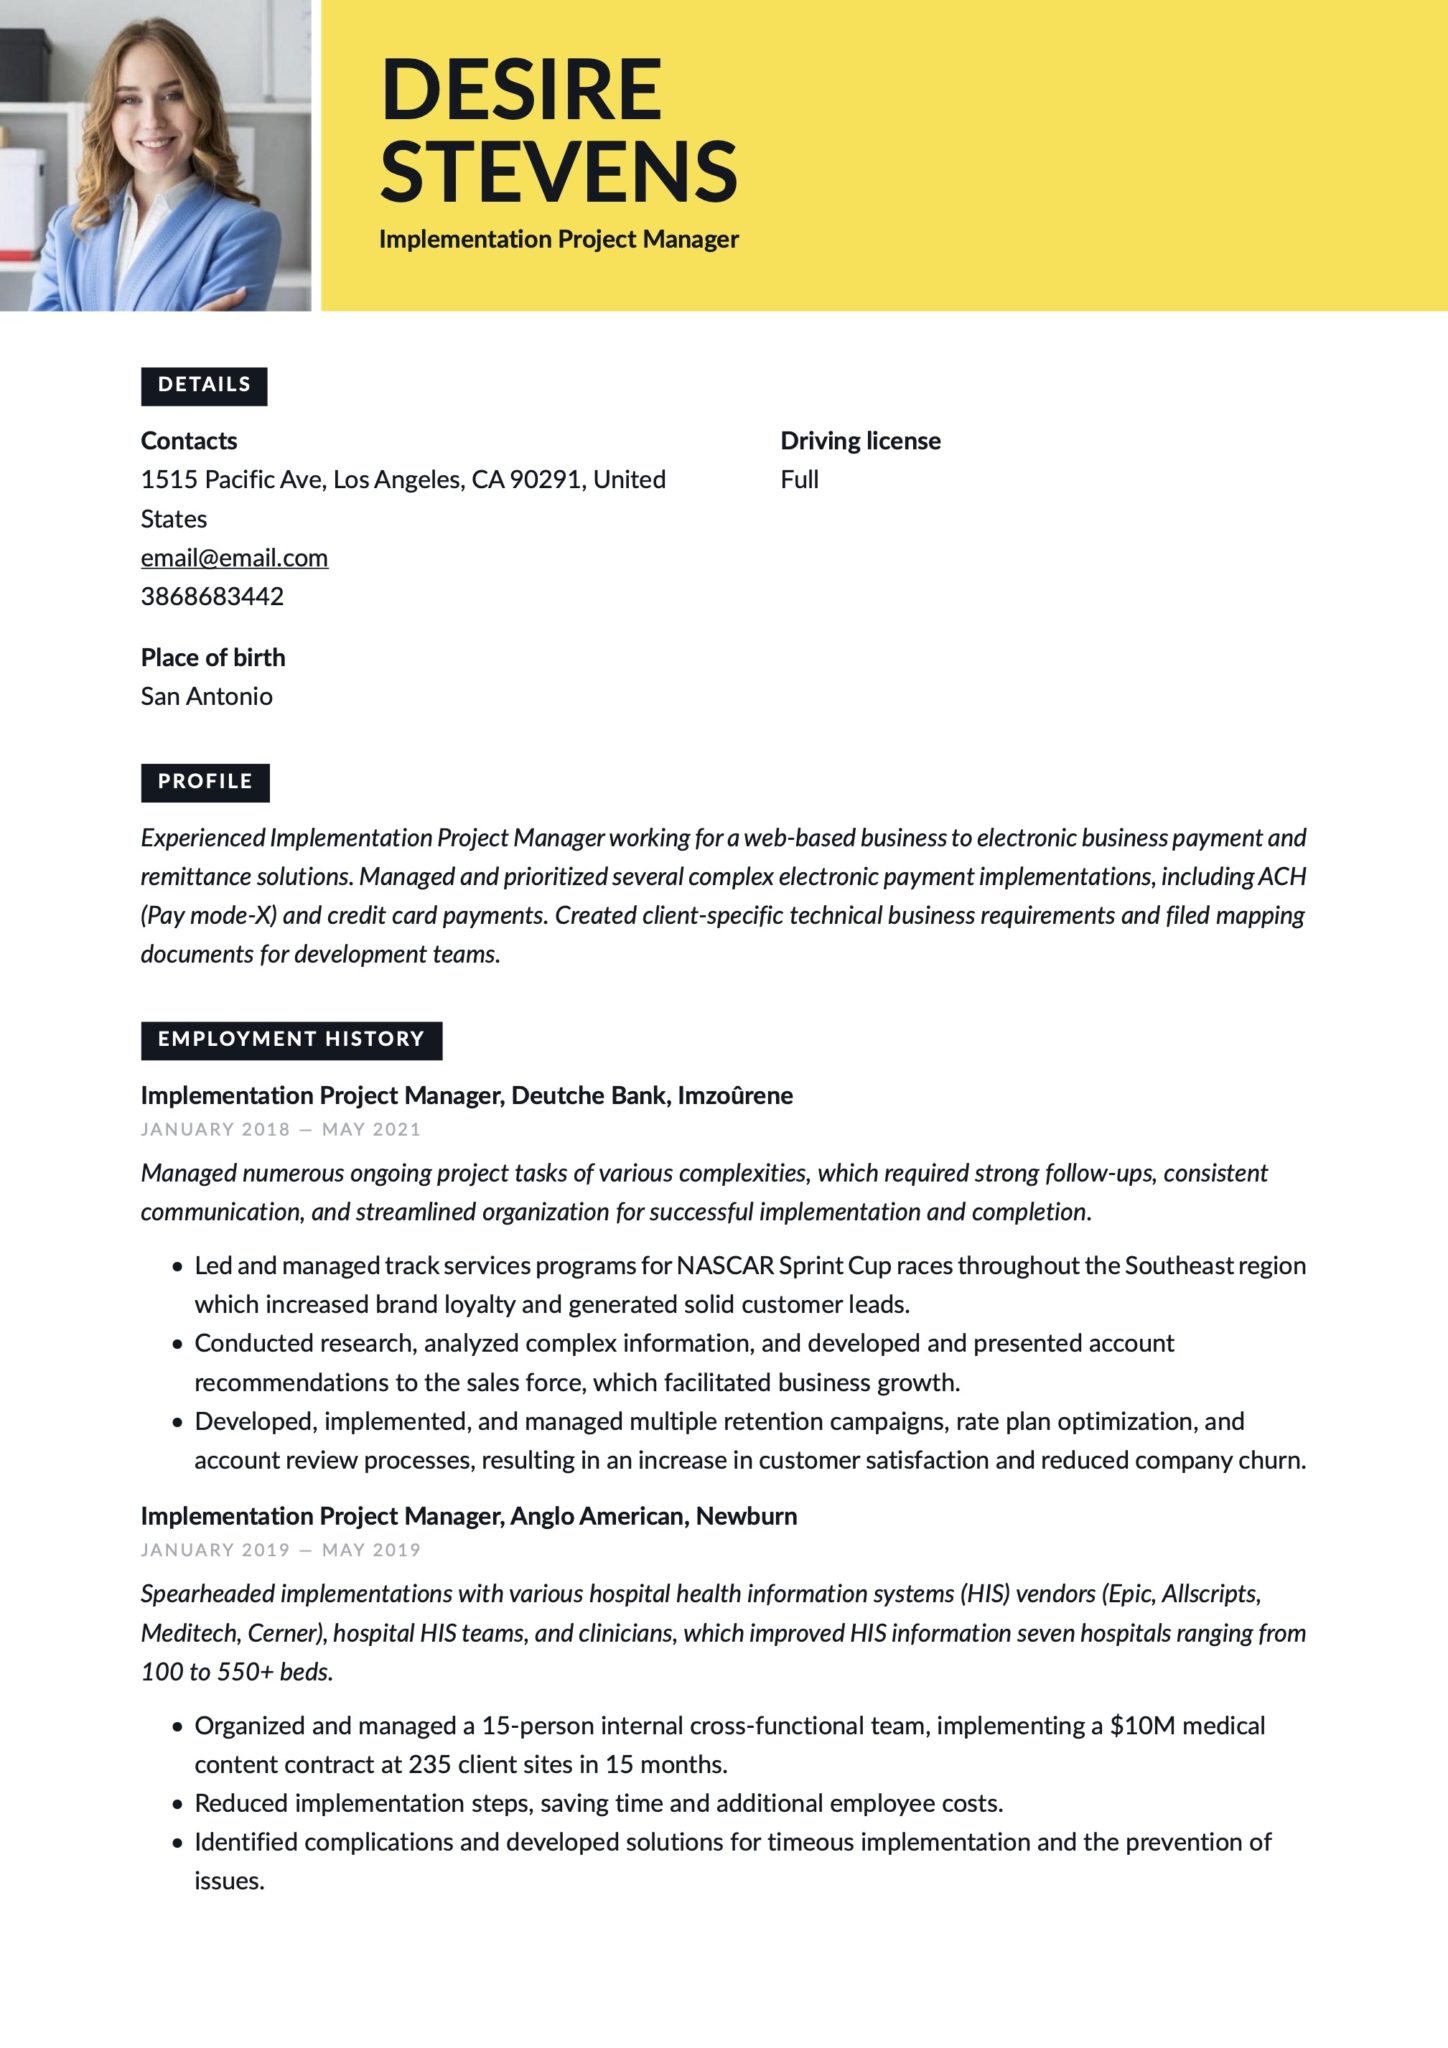 Implementation Project Manager Resume Template